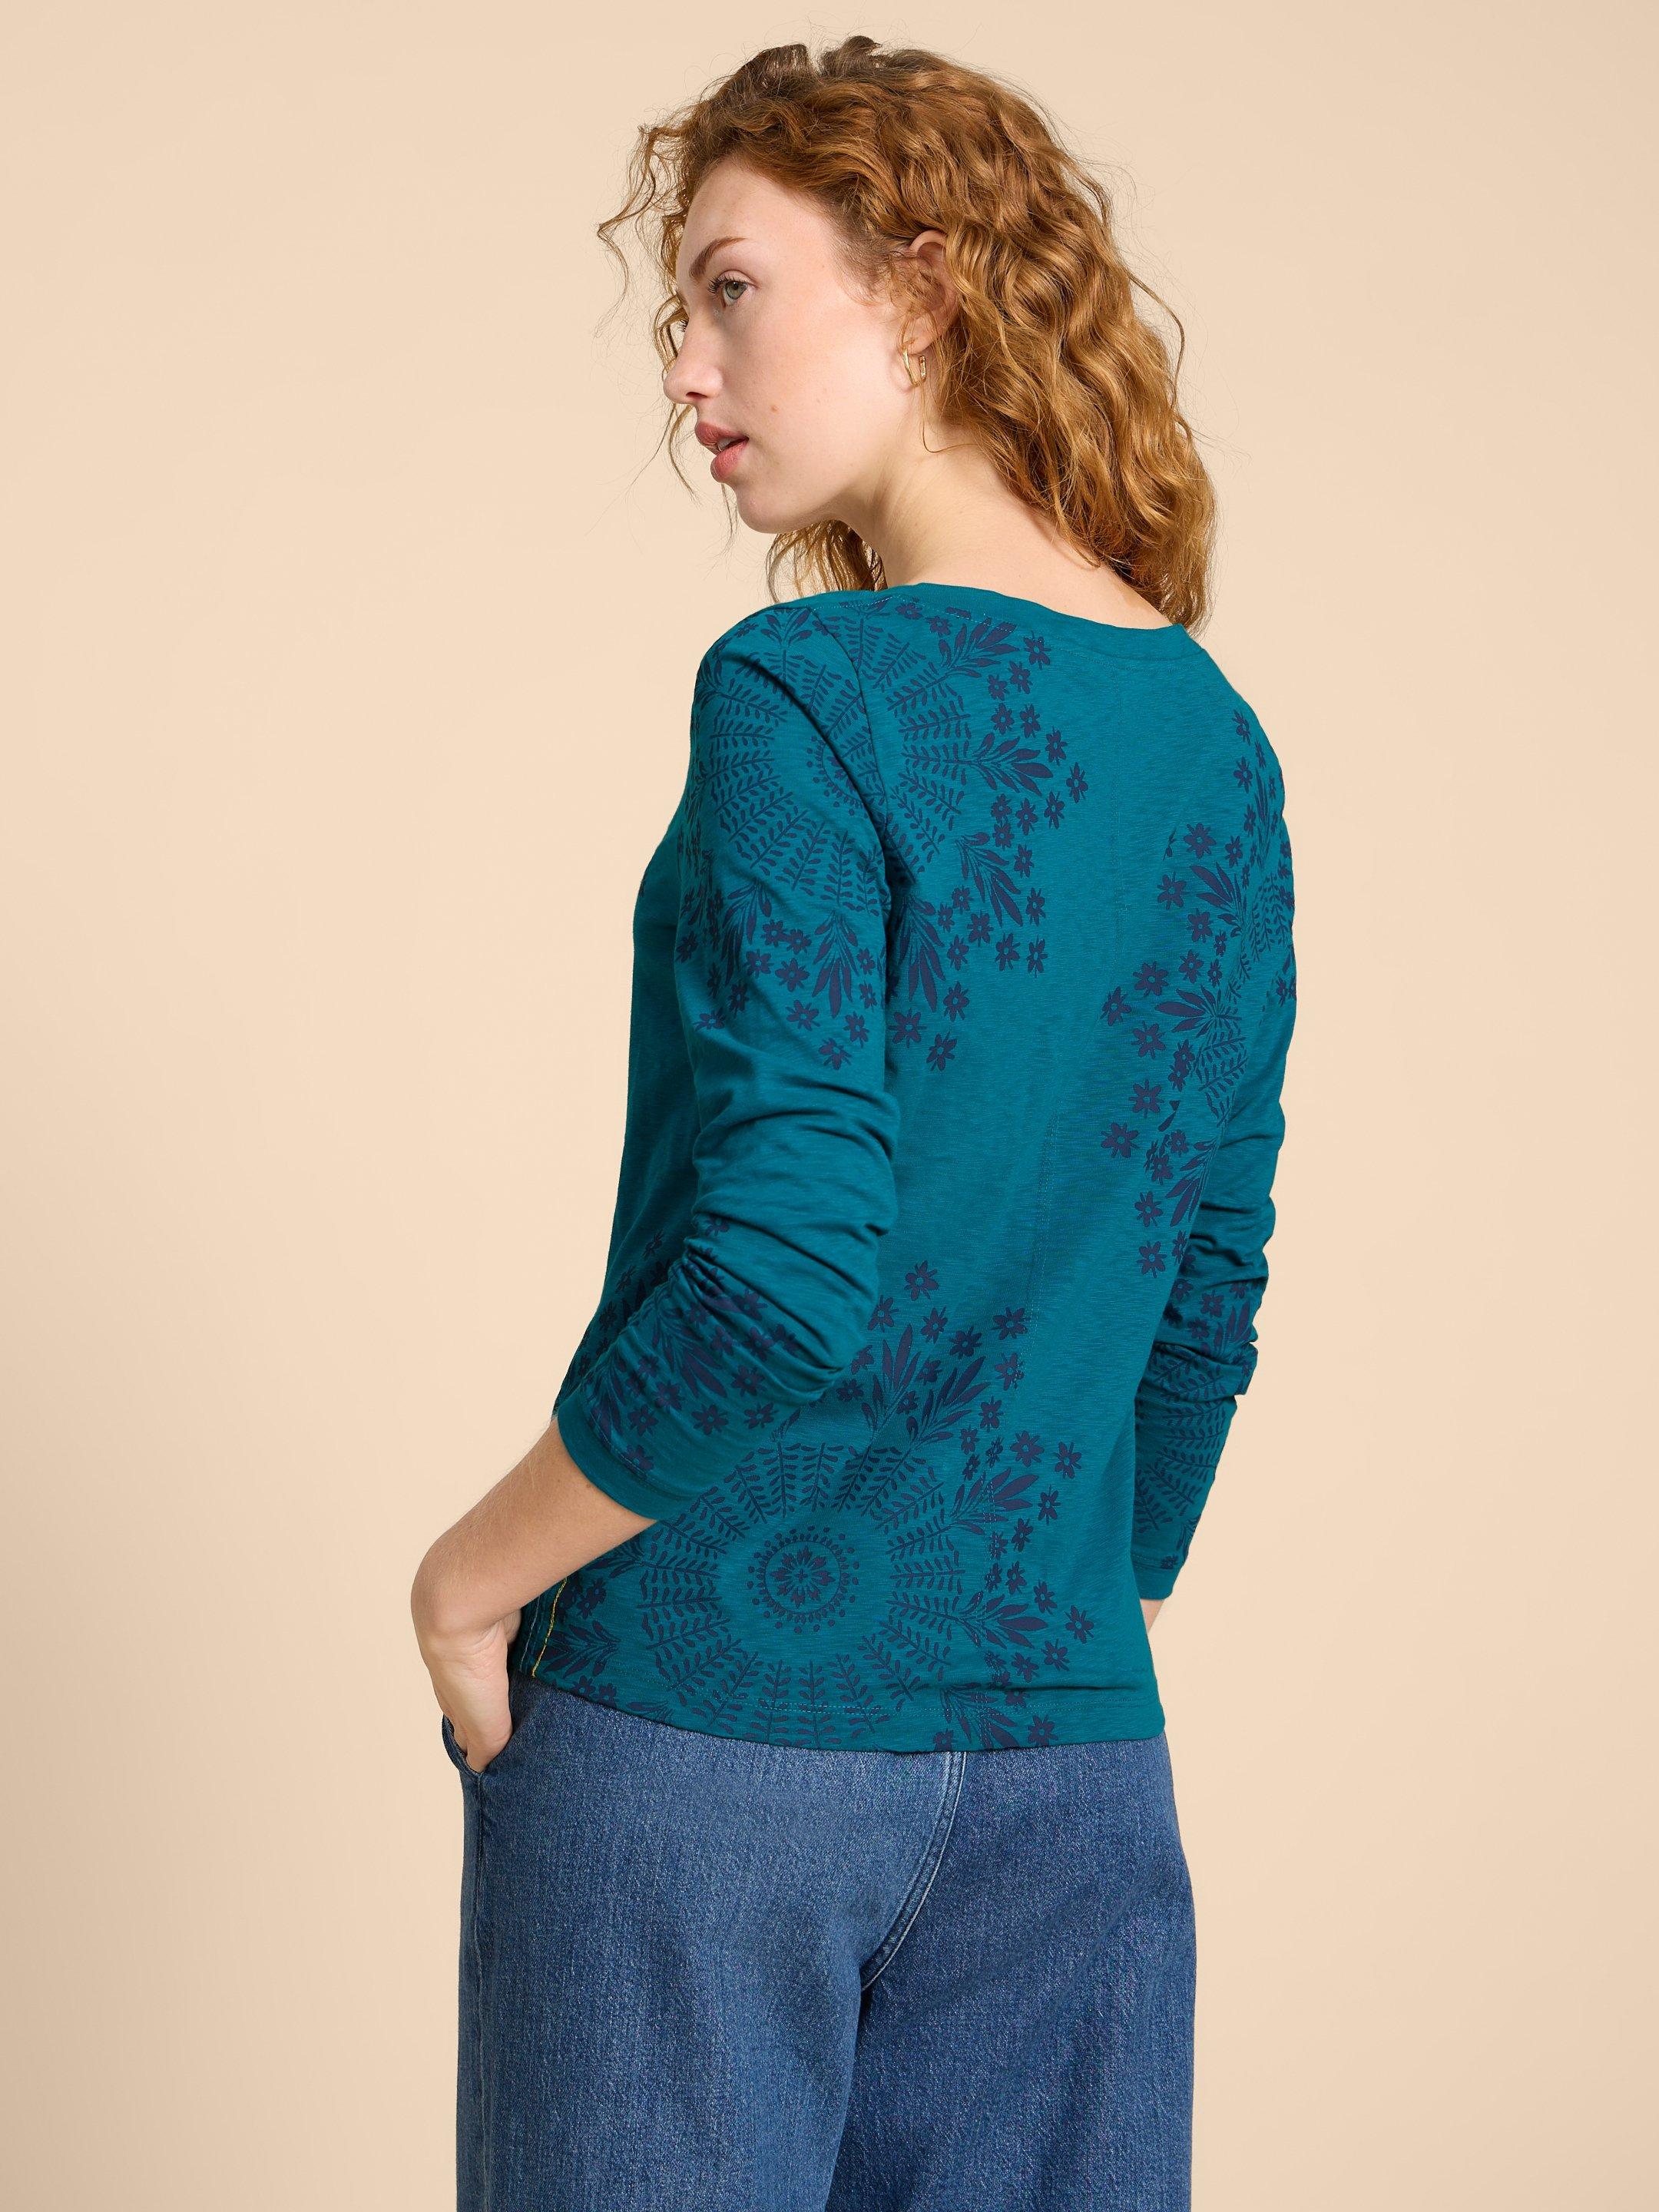 NELLY LS PRINTED TEE in TEAL PR - MODEL BACK